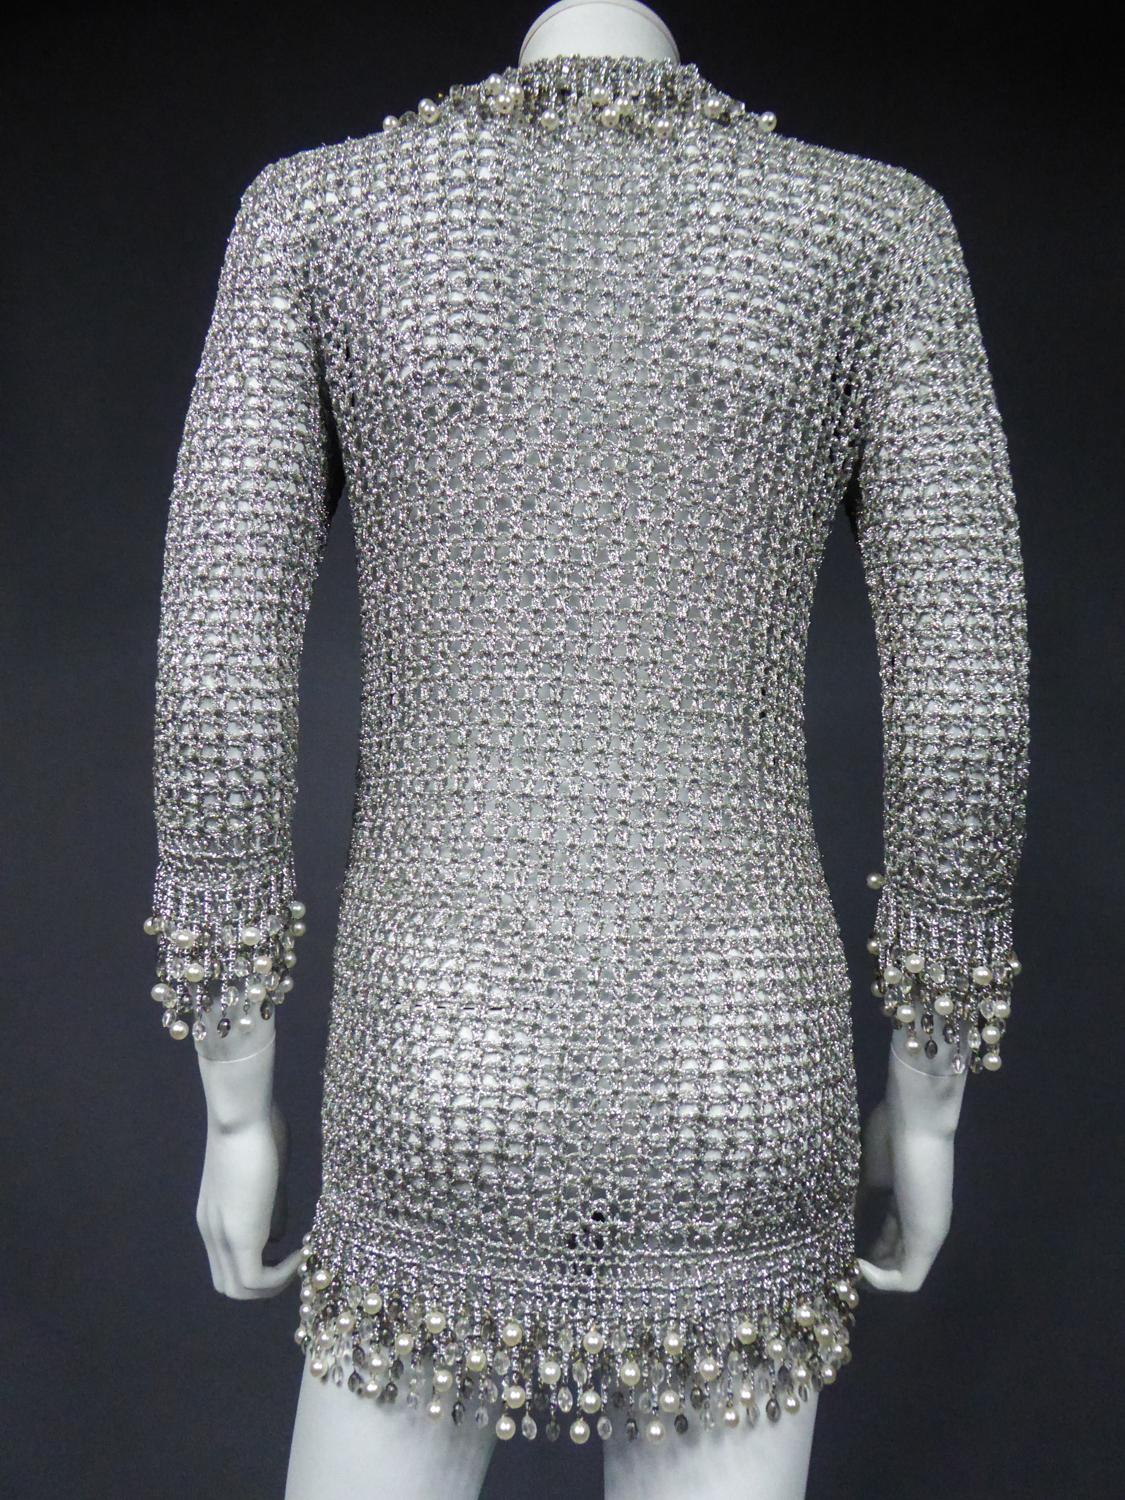 A Loris Azzaro Evening Jacket in Silver Lurex Embroidered with Pearls Circa 1970 10